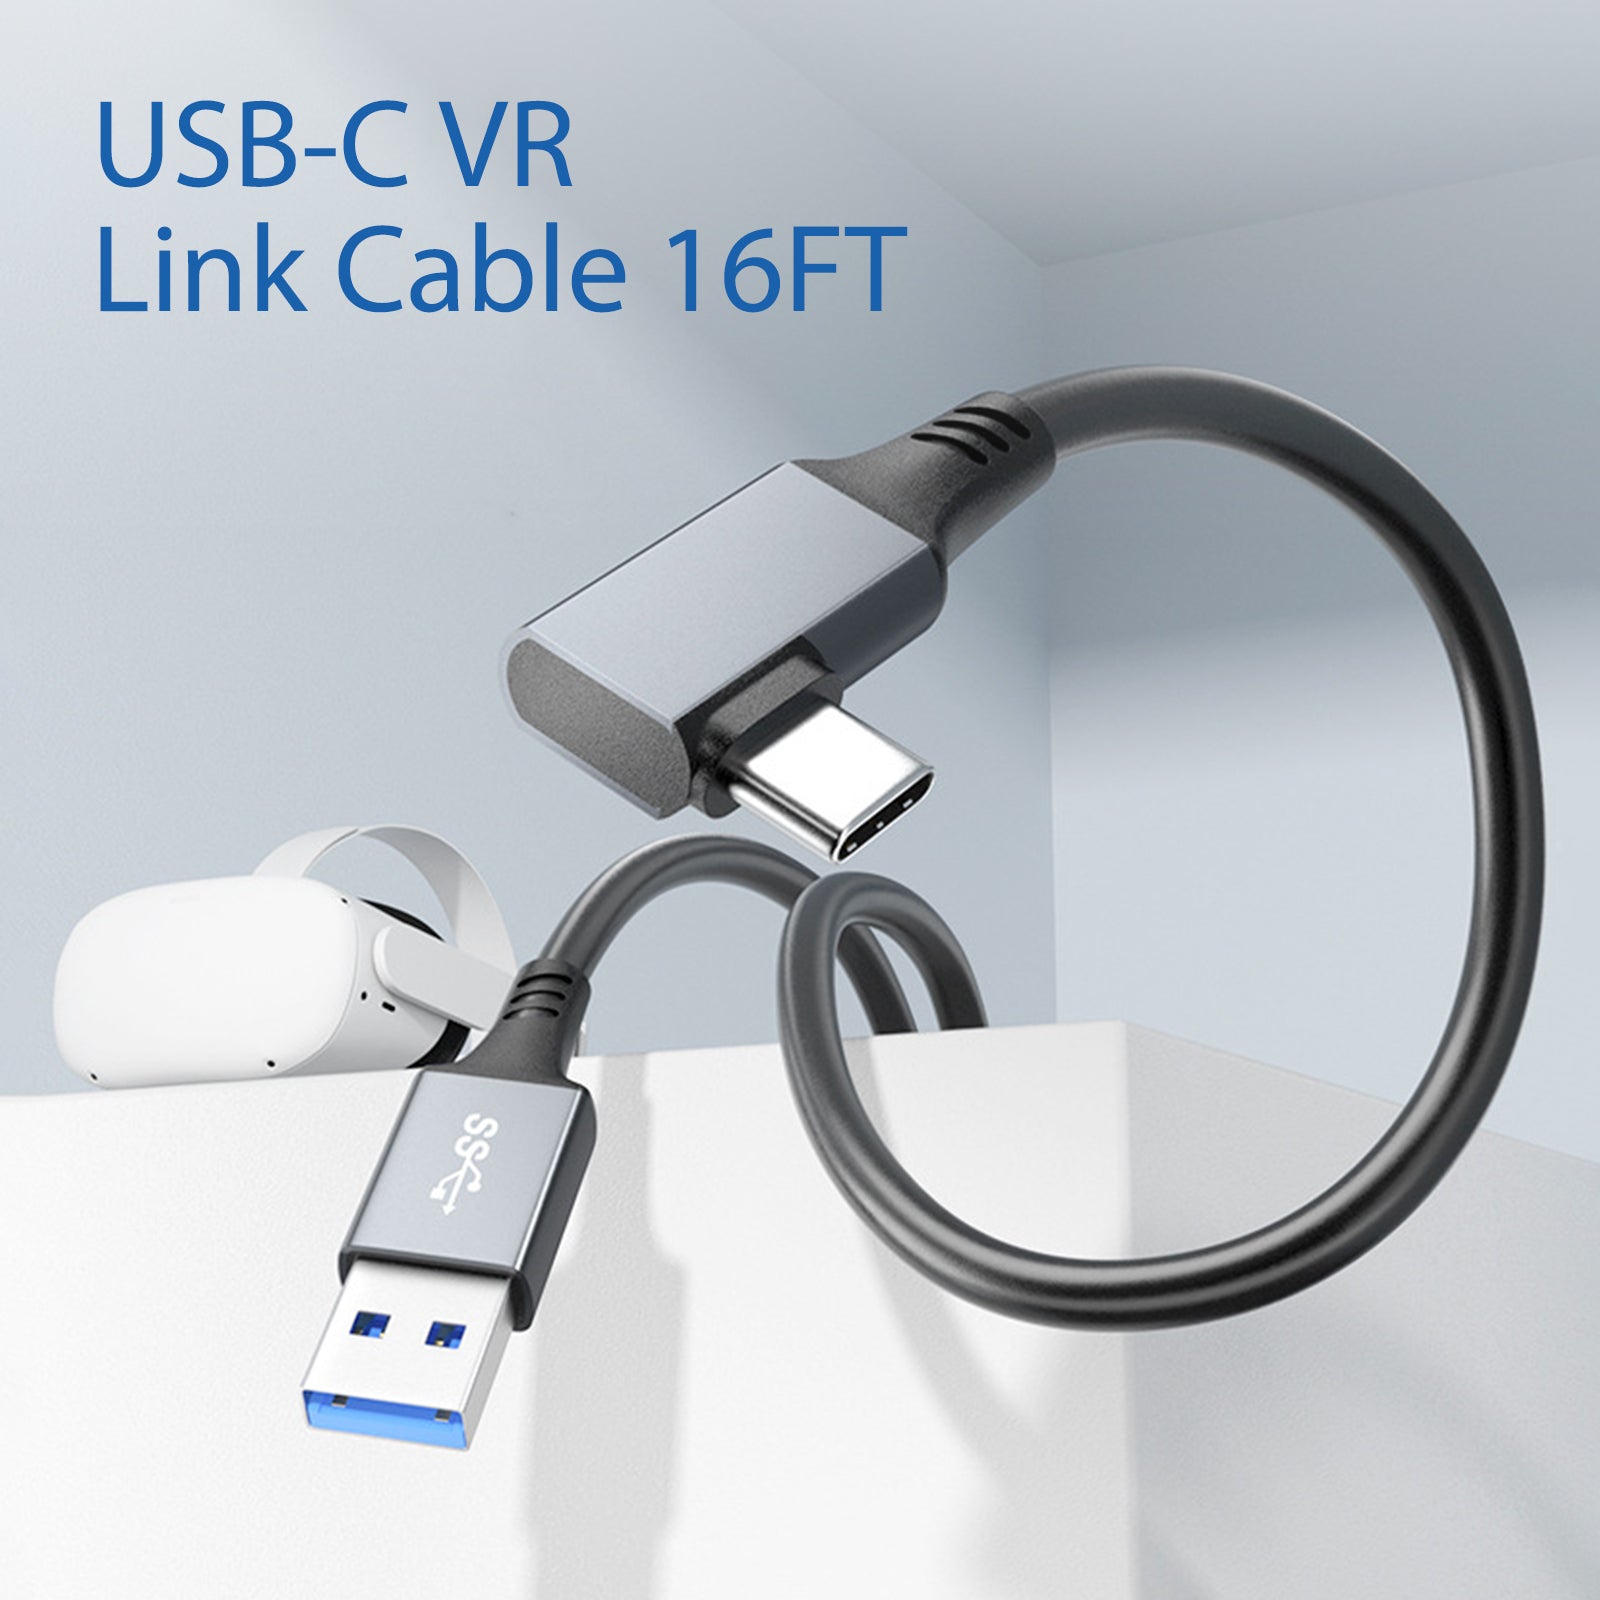 for Oculus Quest 2 Link Cable 16FT, VR Link Headset Cable for Oculus Quest  2 / Quest 1 and PC/Steam VR,USB 3.0 to USB C Cable Support Data Transfer